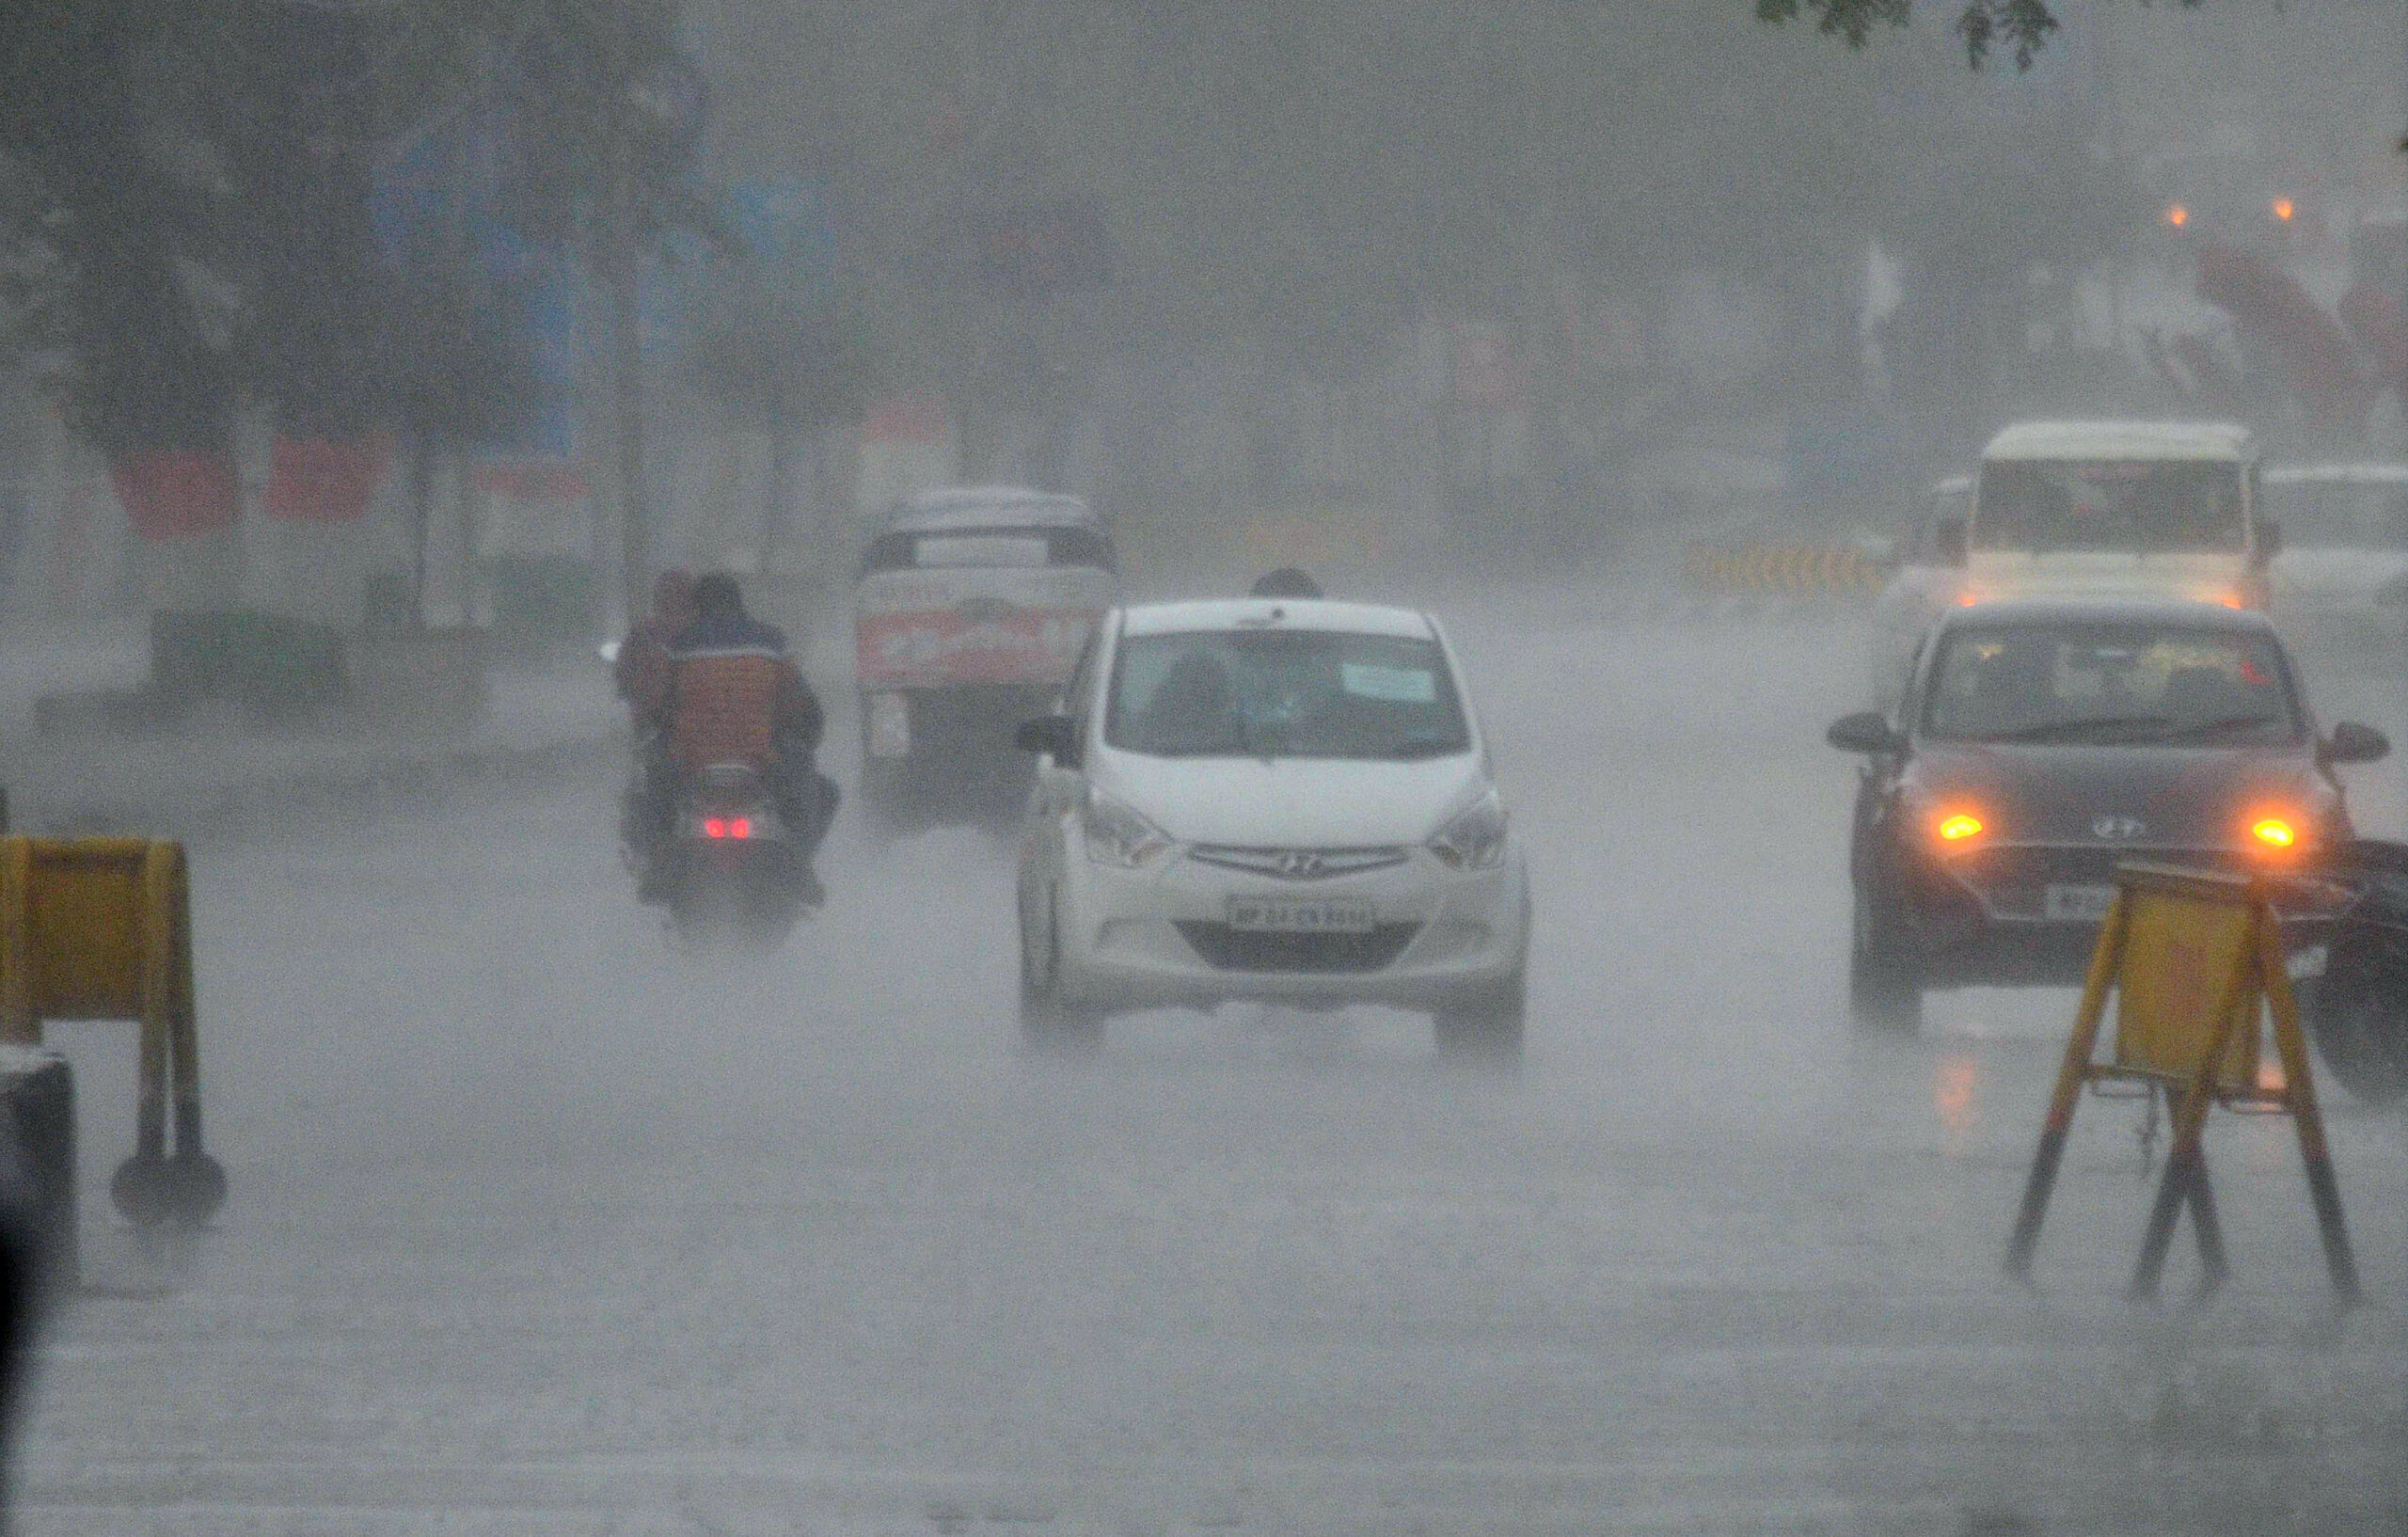 Thunderstorm with light intensity rain likely to occur in Delhi, says IMD